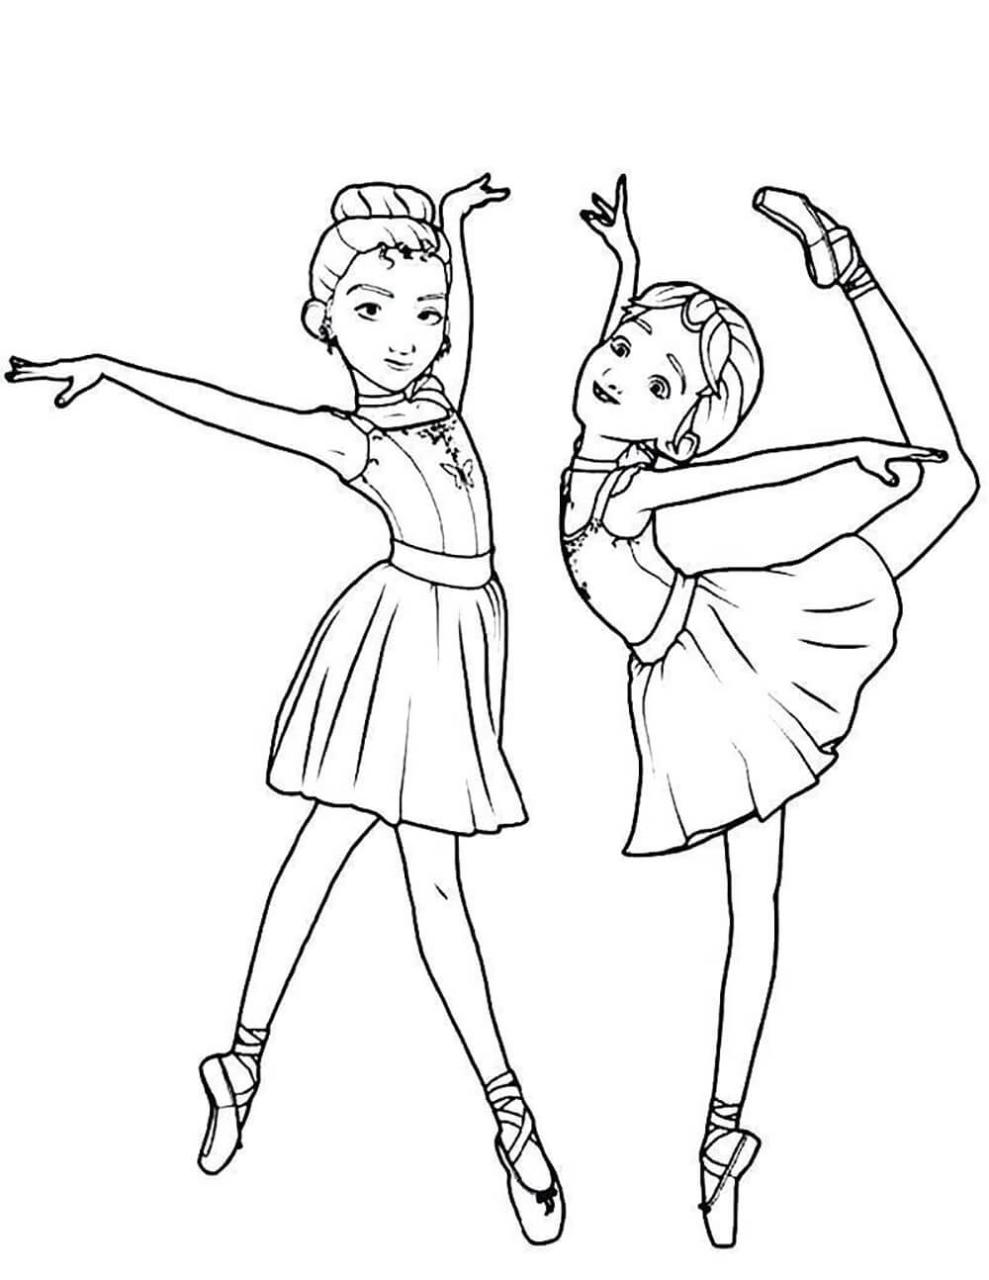 Coloring Page Ballet